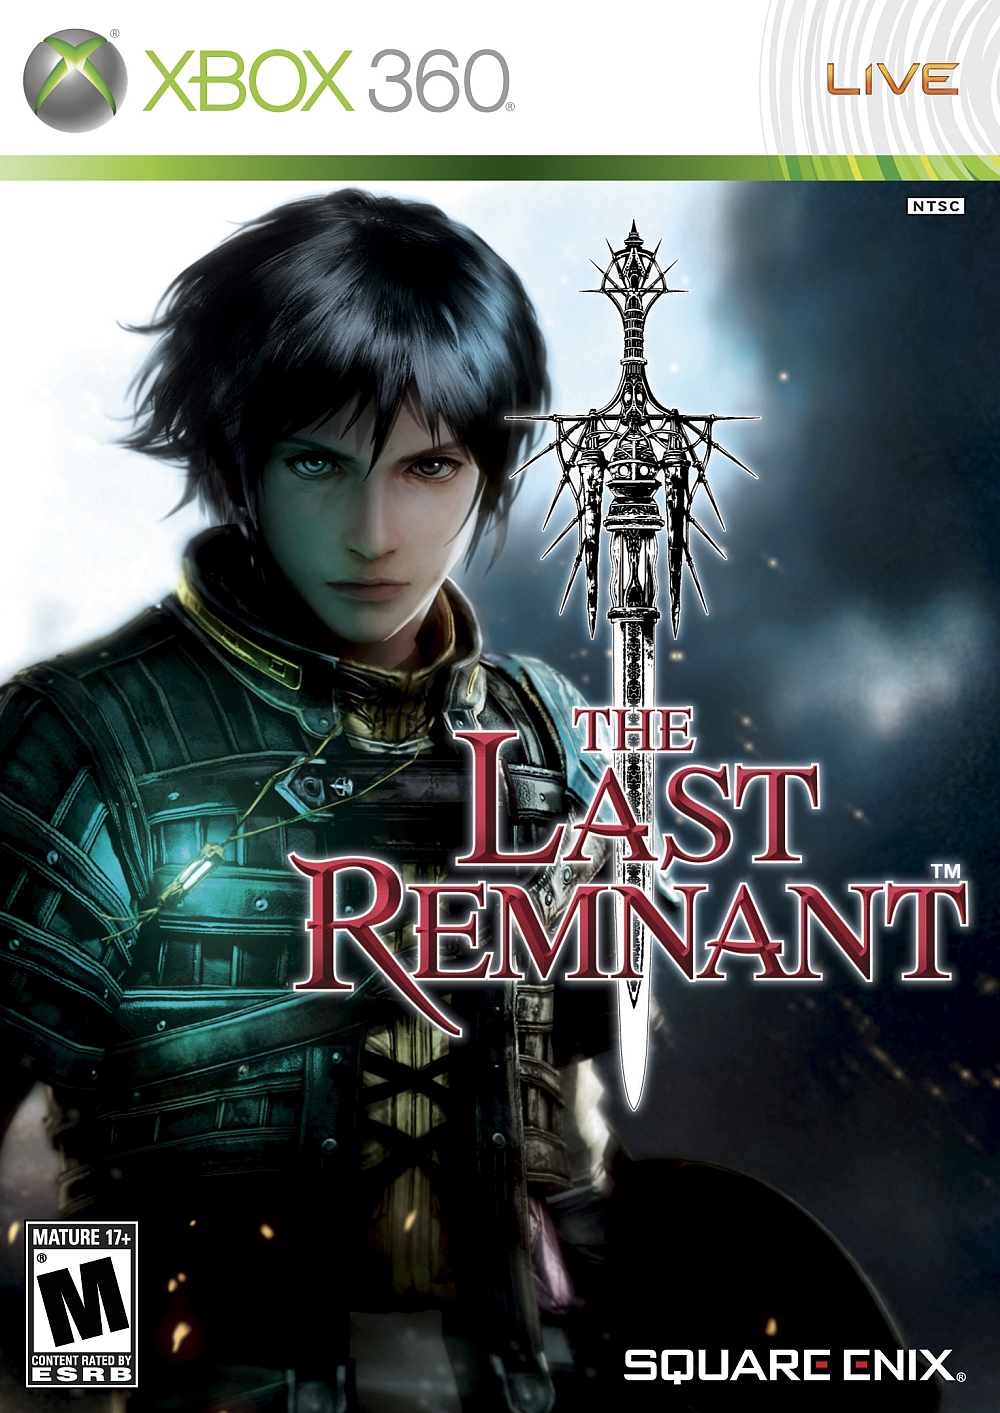 The Last Remnant #3